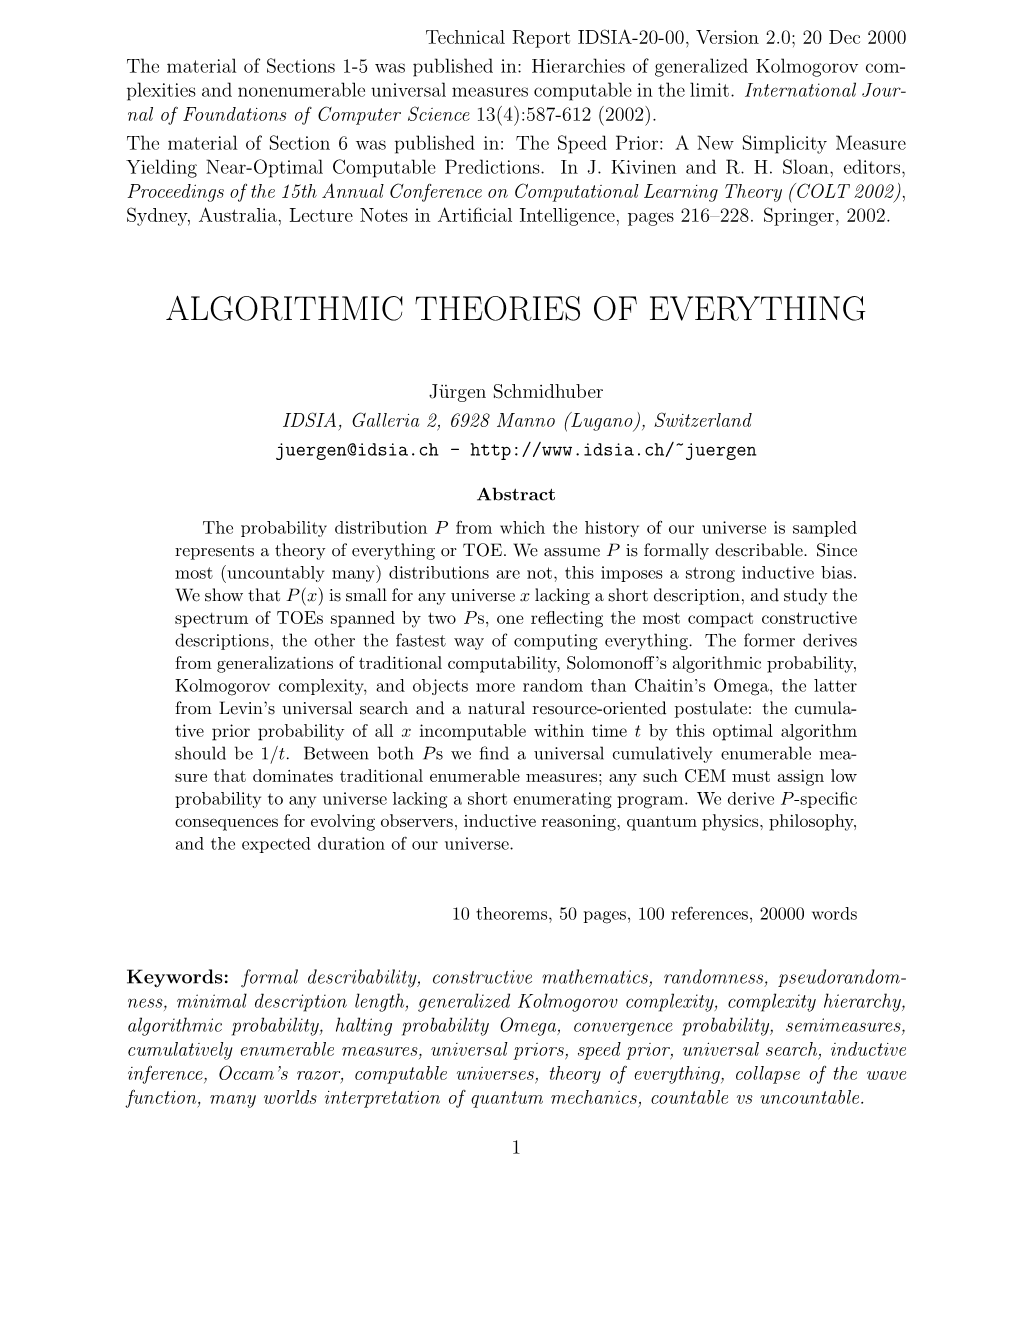 Algorithmic Theories of Everything